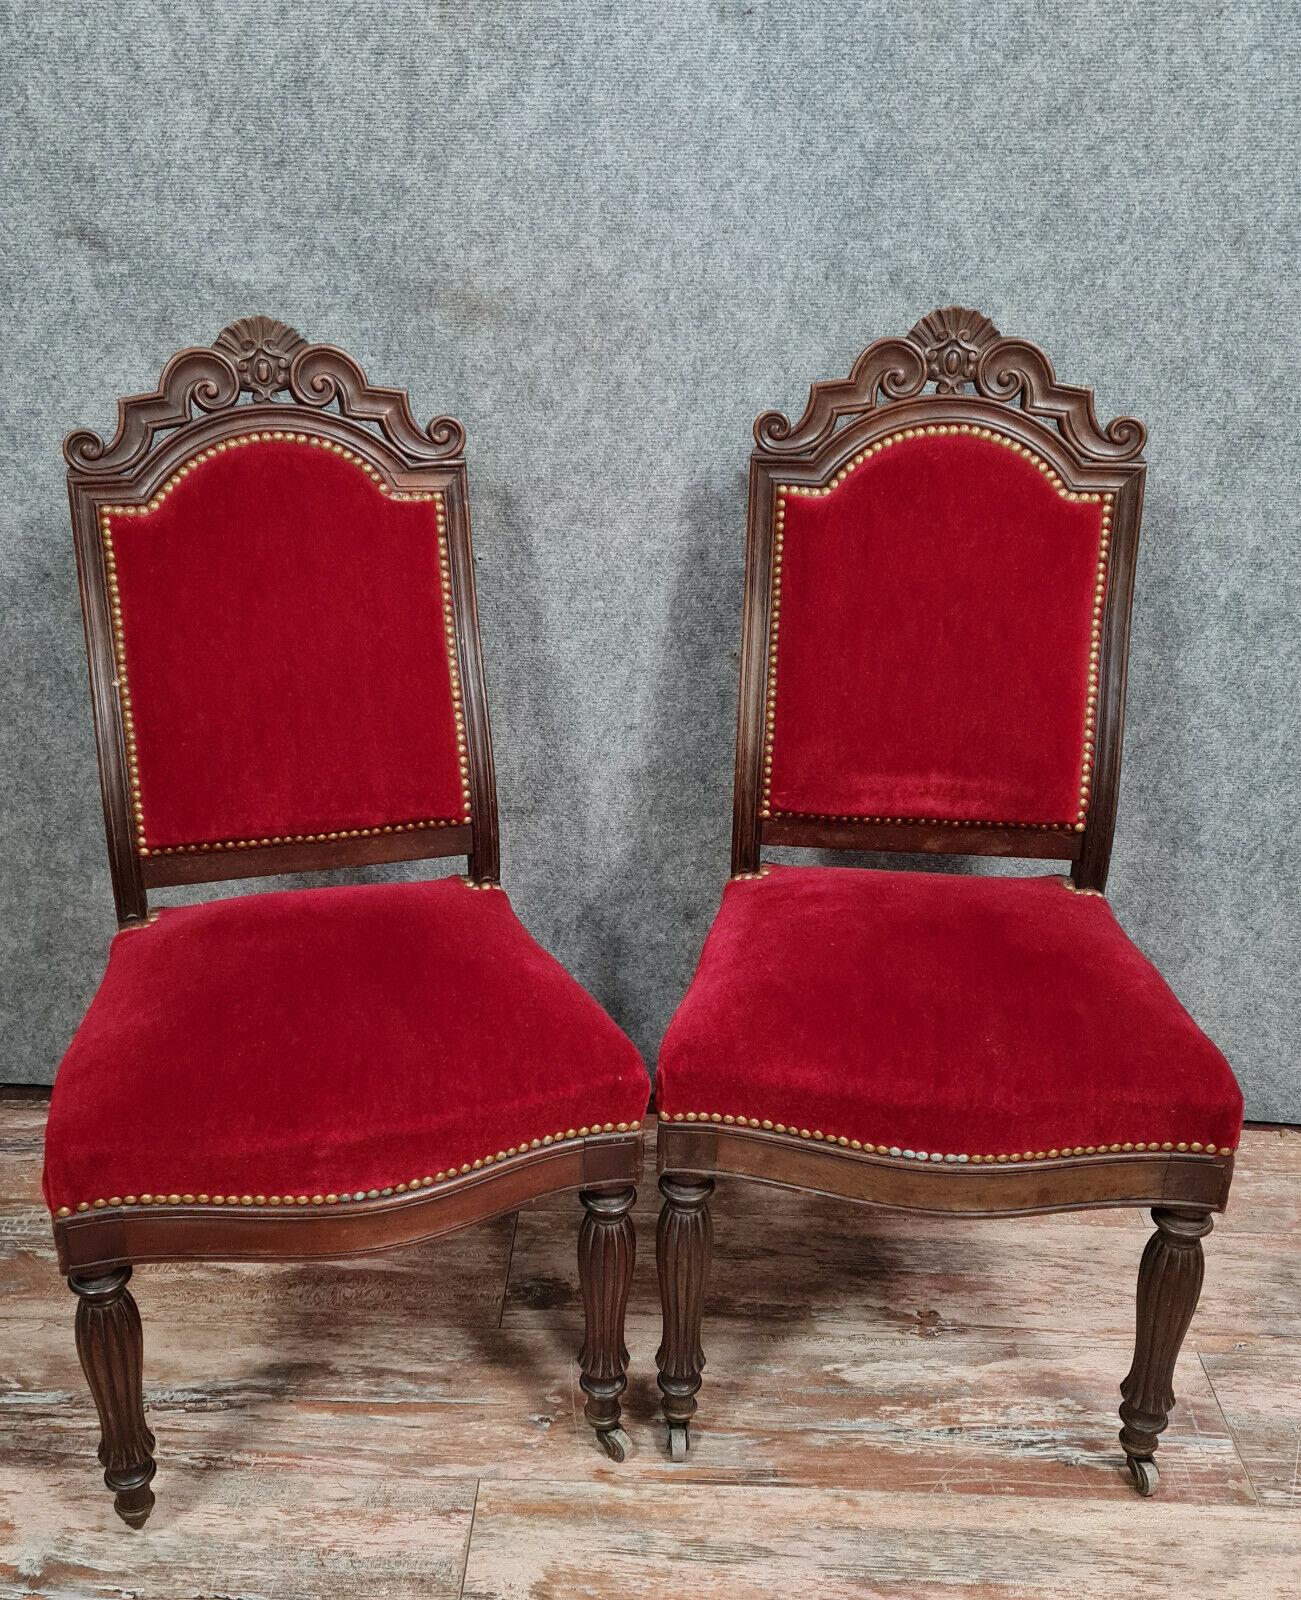 Exquisite Set of 4 Restauration Period Mahogany Chairs, circa 1820 -1X32 For Sale 5